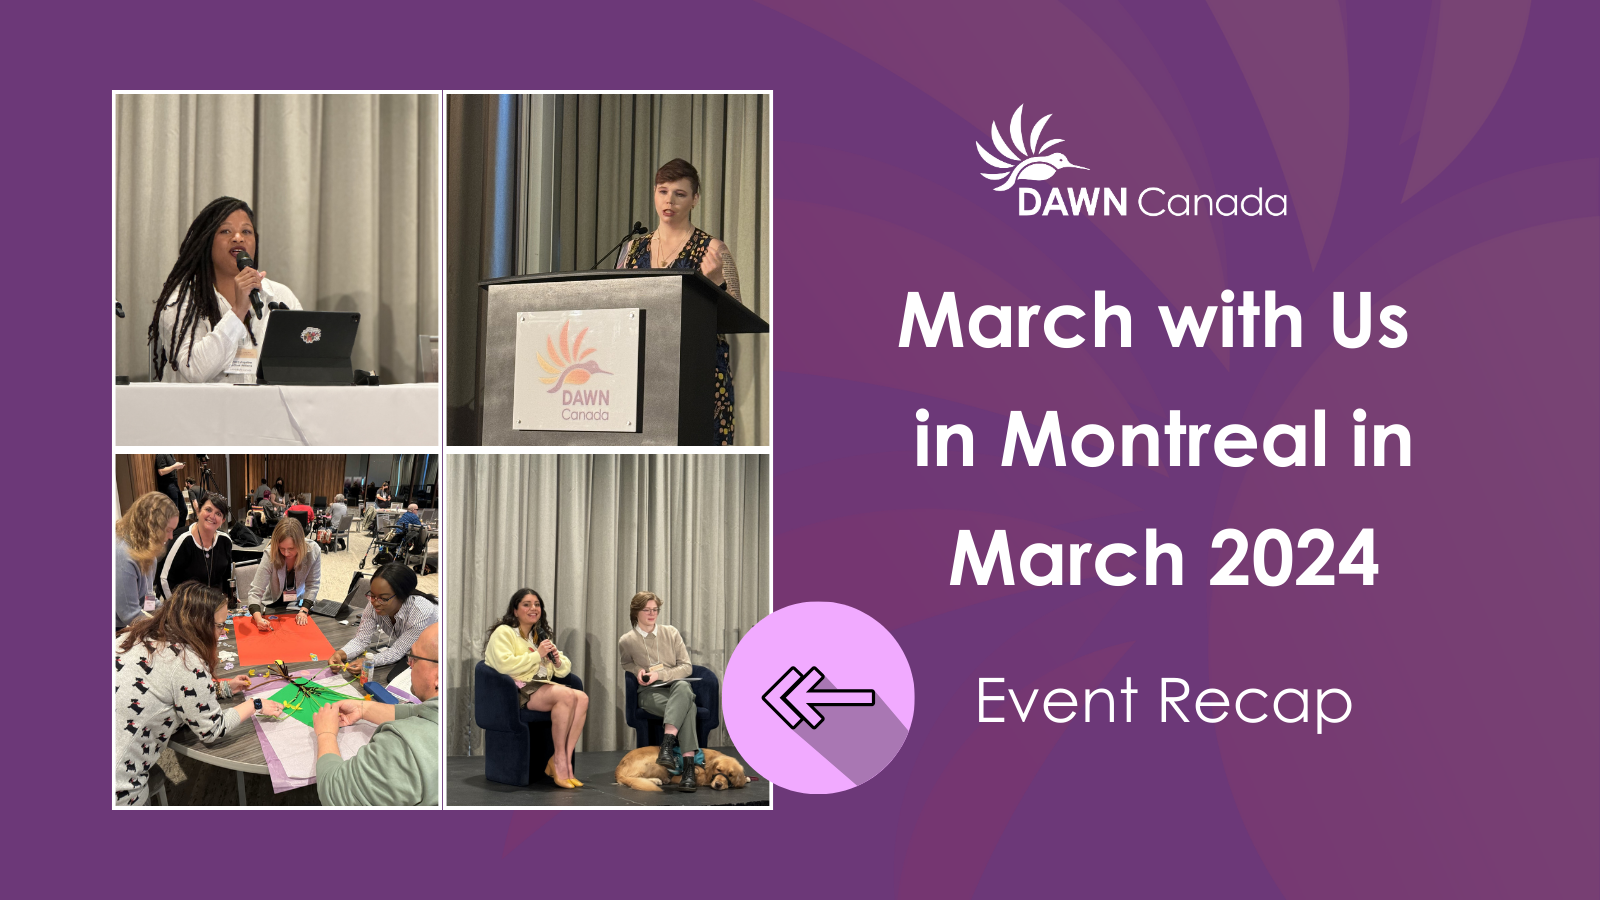 A look back at "March with Us in Montreal in March"